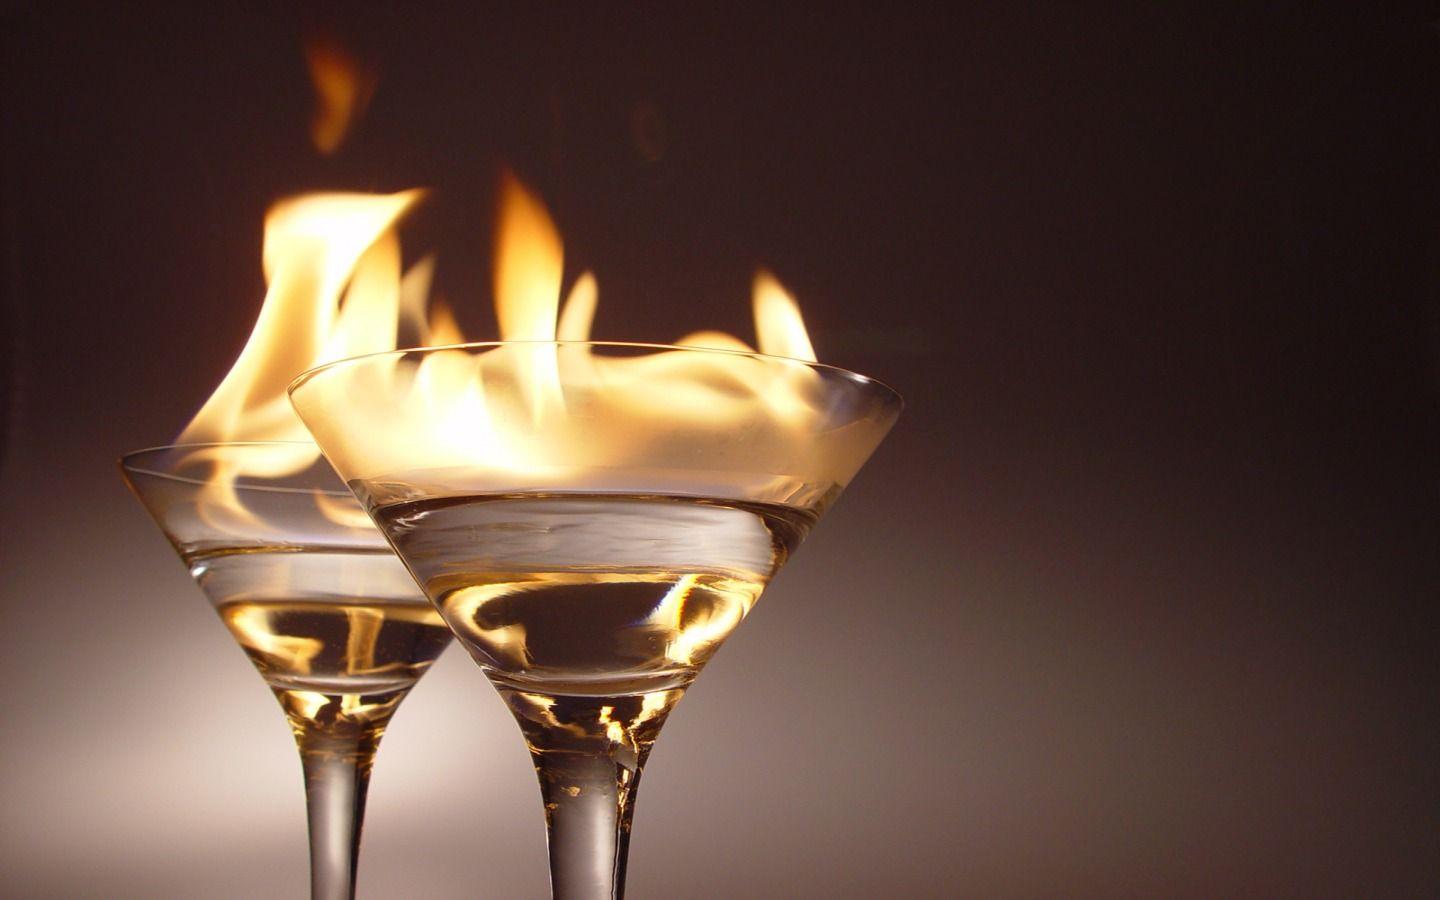 Flaming cocktails Wallpaper Miscellaneous Other Wallpaper in jpg